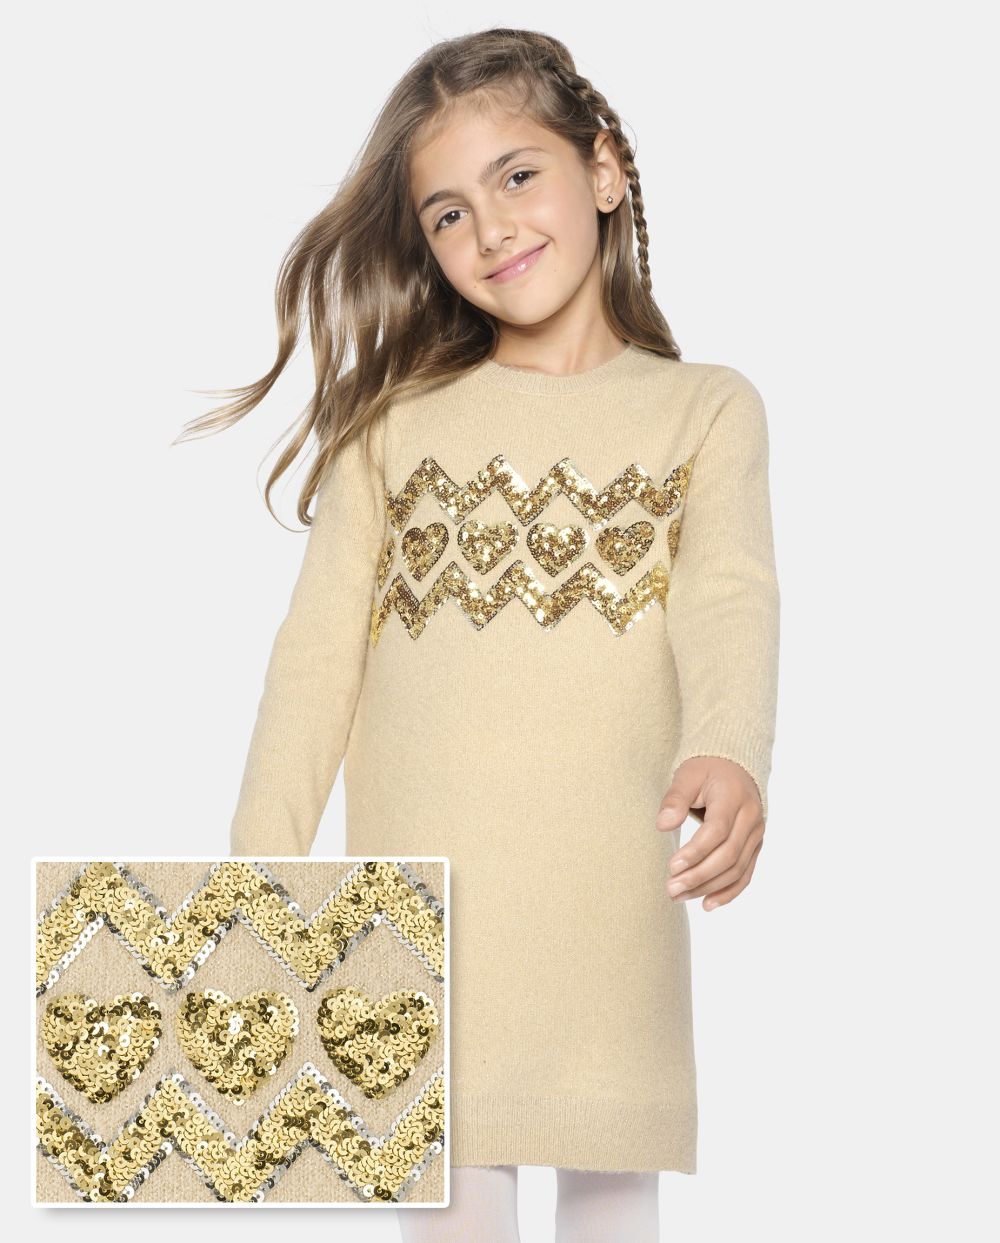 Tall Girls Zig Zag Print Crew Neck Long Sleeves Above the Knee Sweater Sequined Dress